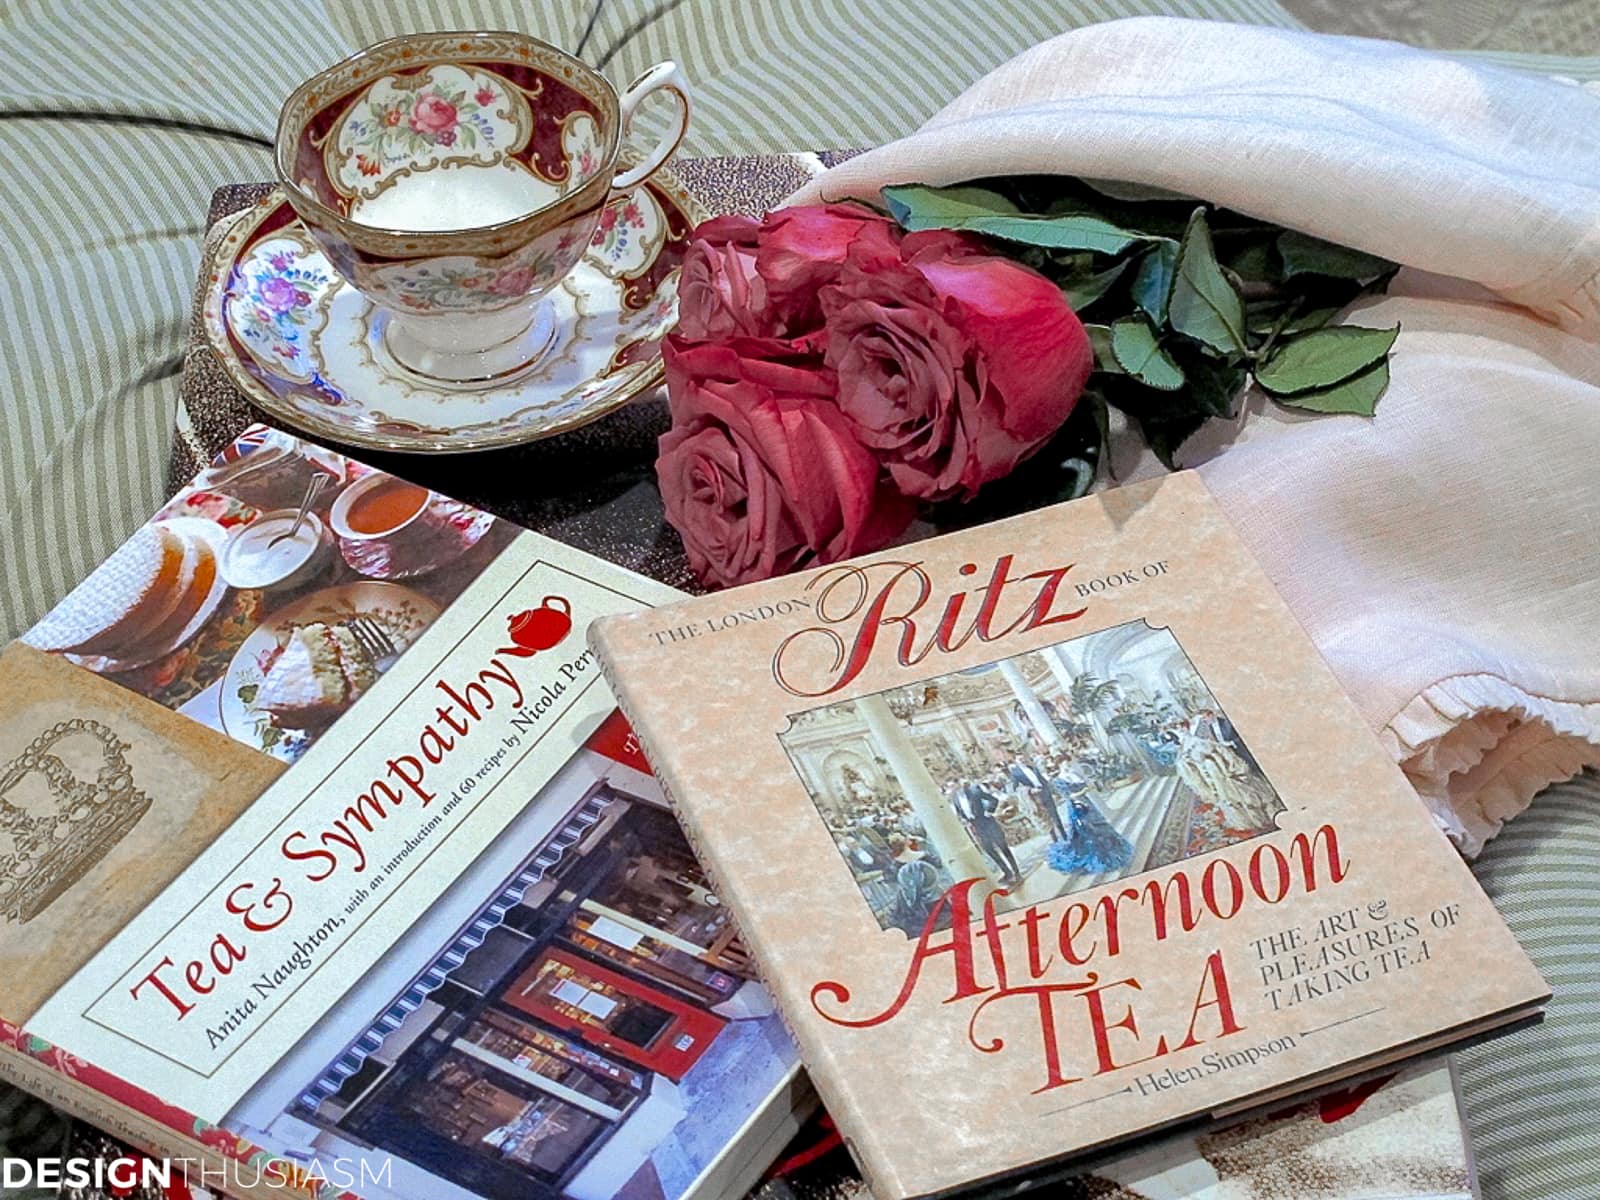 Classic teacups and plates books